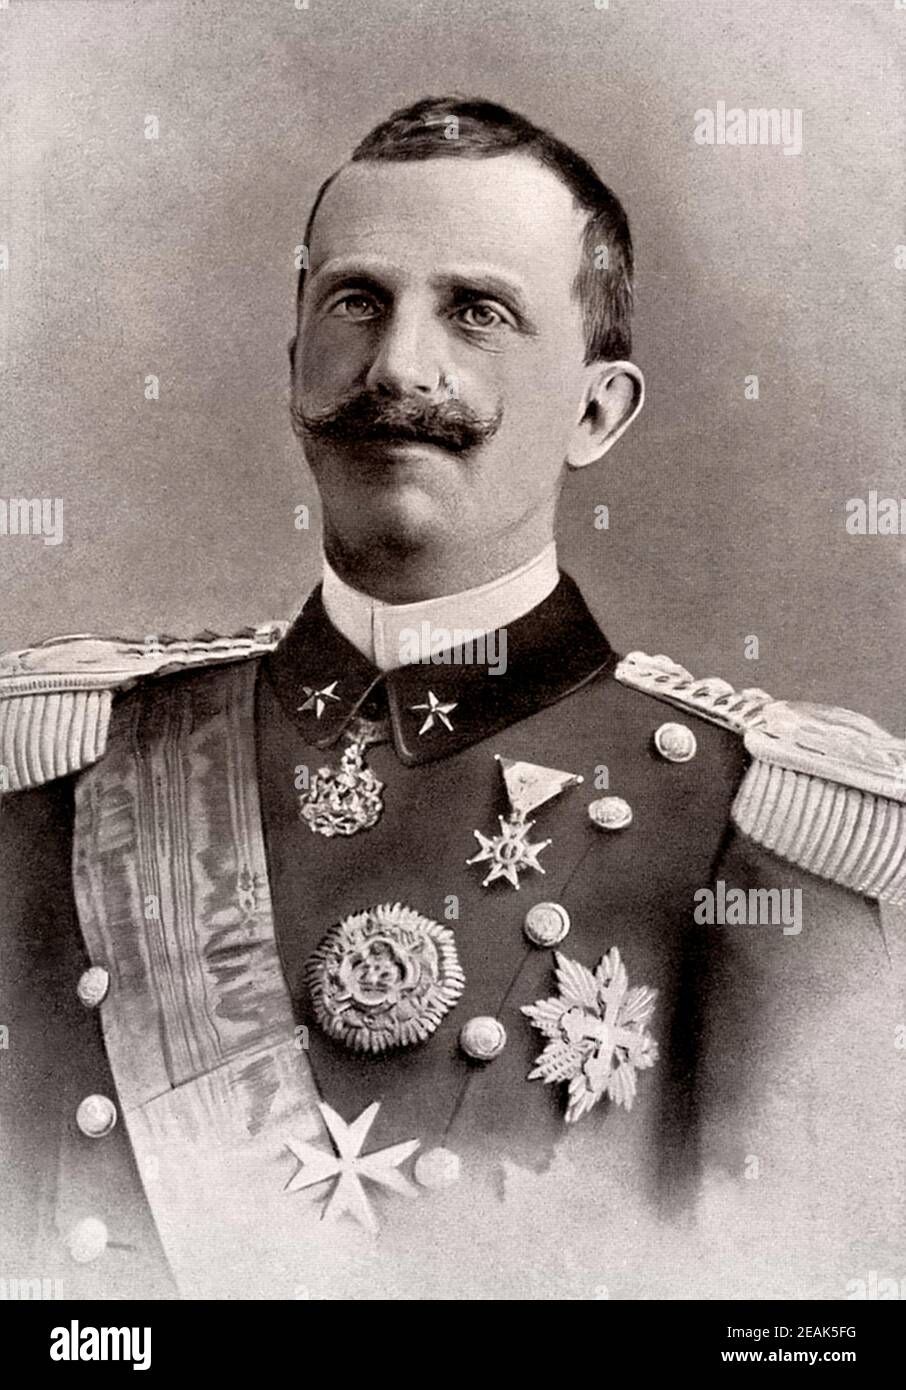 Victor Emmanuel III (Vittorio Emanuele III, 1869 – 1947) was the King of Italy from 1900 until his abdication on 9 May 1946. In addition, he held the Stock Photo